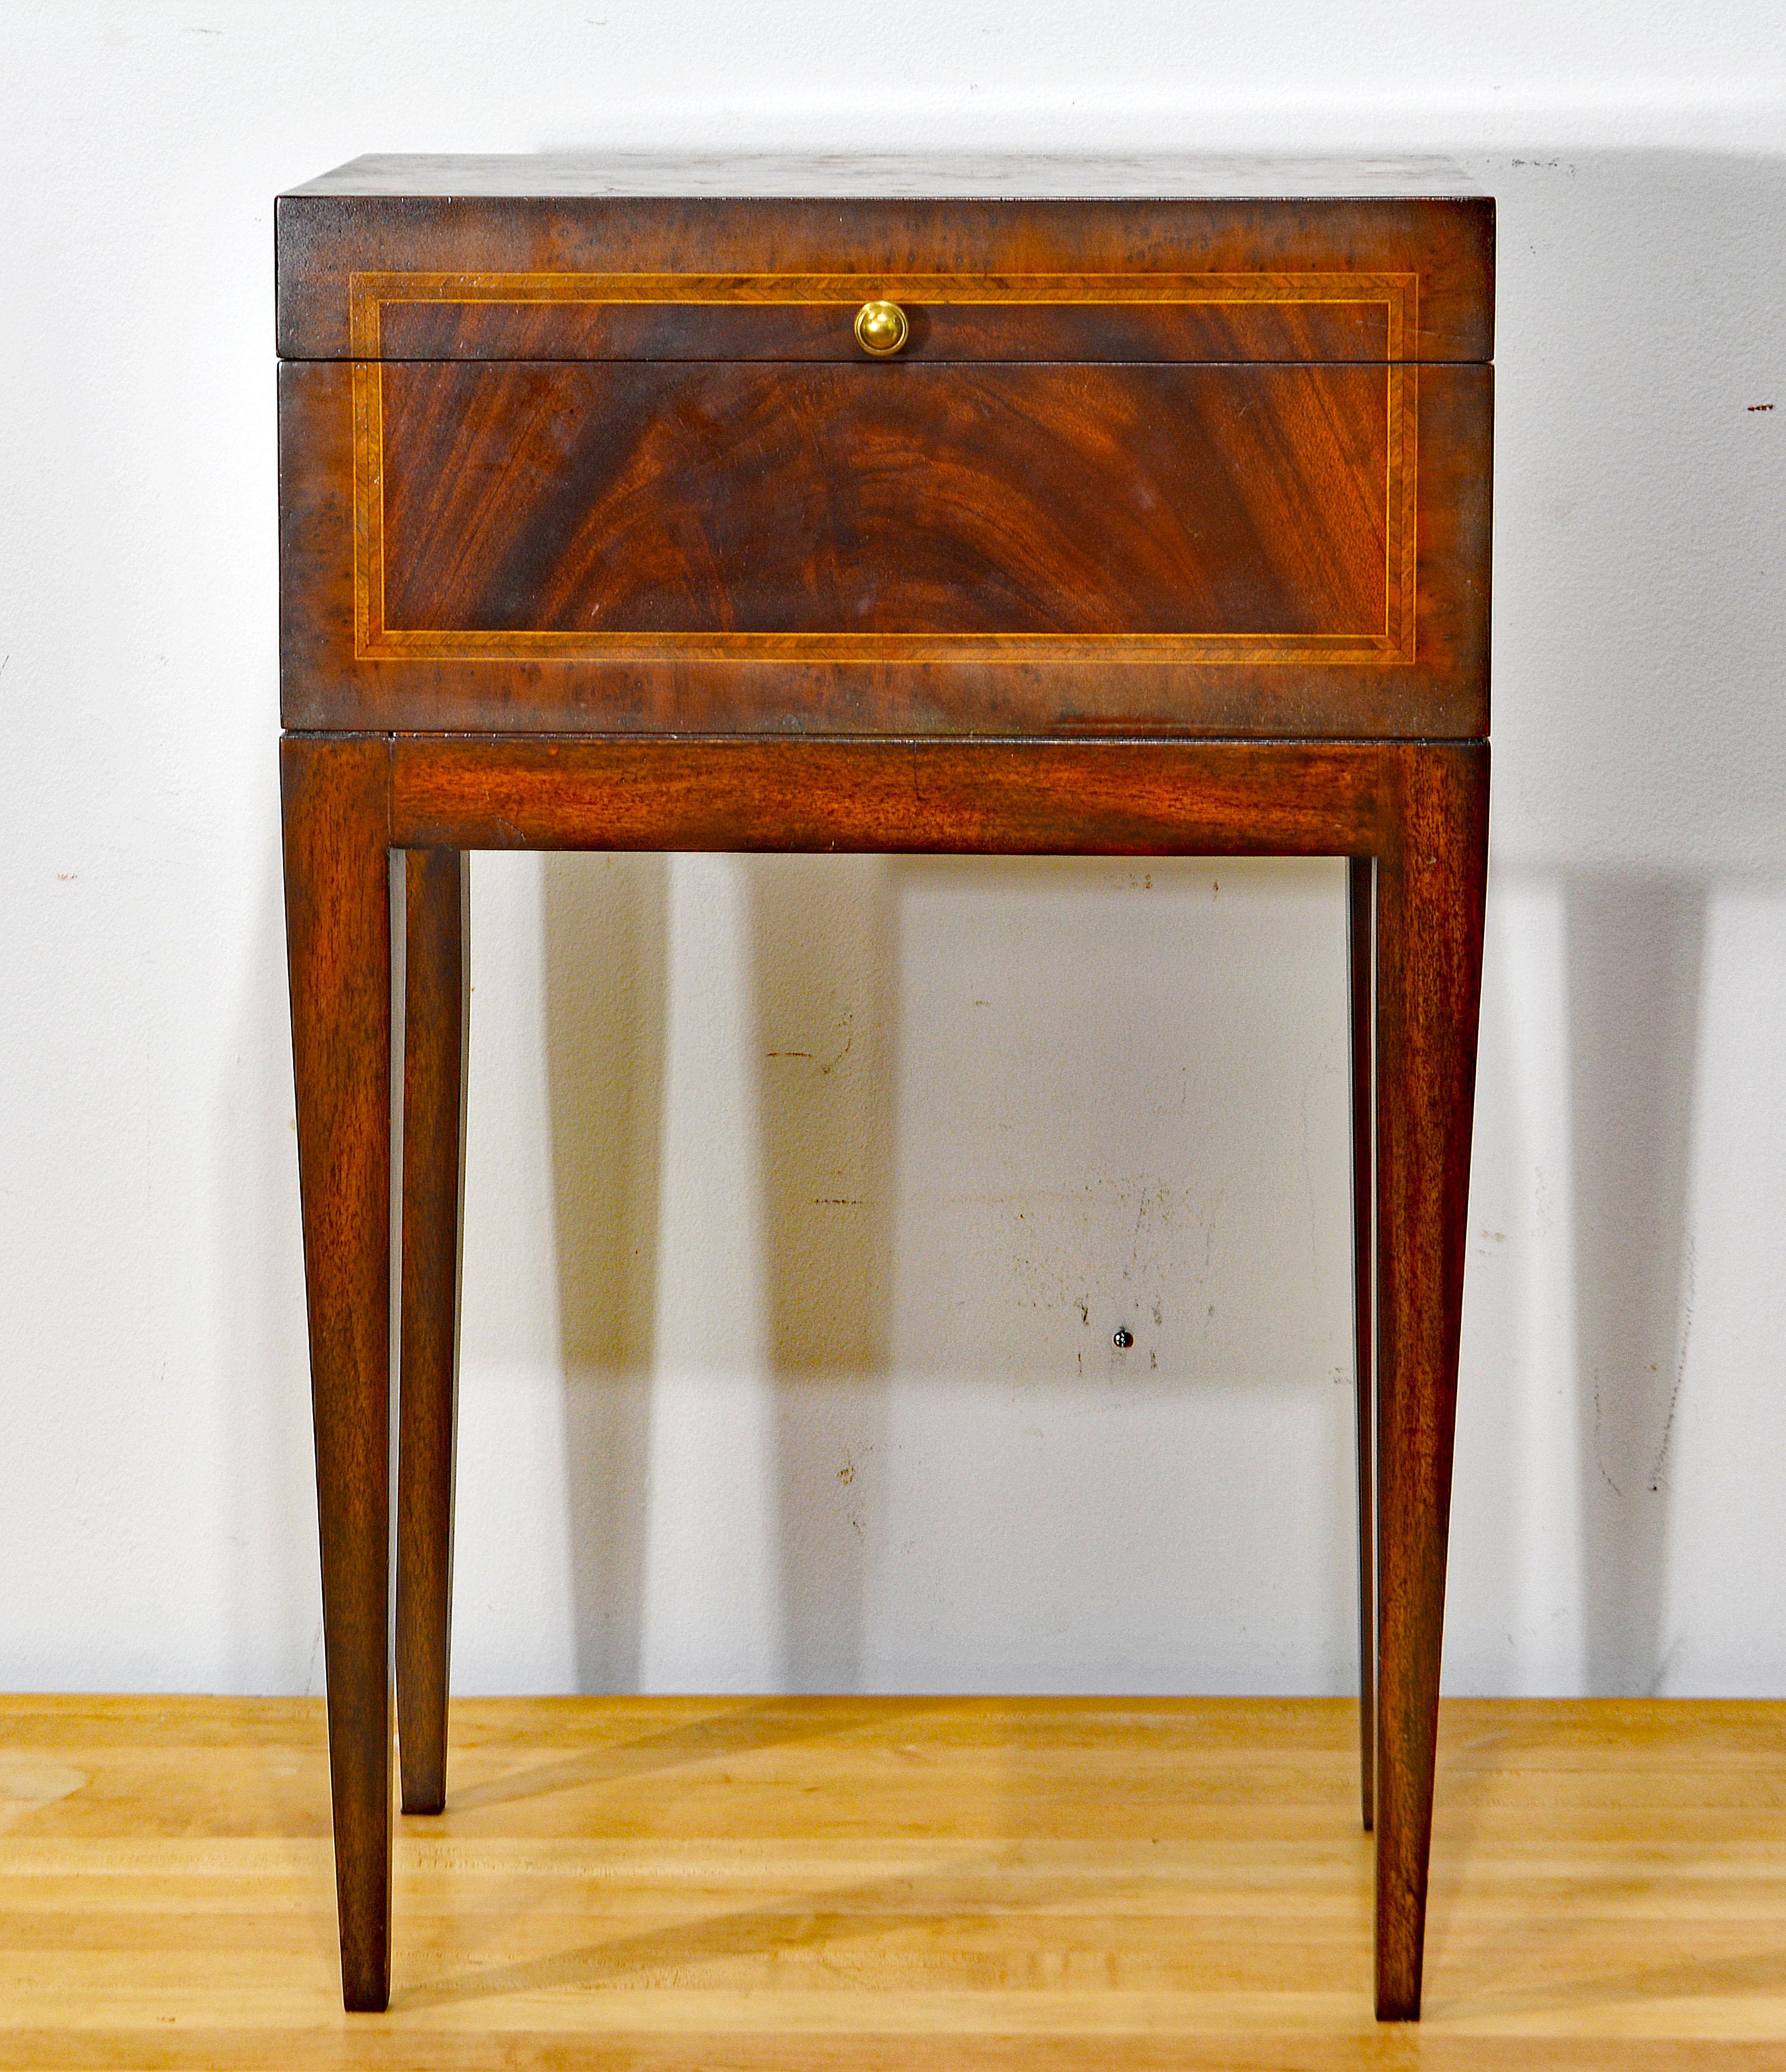 This stylish Maitland Smith mahogany side table features a top in the form of a compartment with a lid openeing up to a fully finished interior with the Maitland Smith brass mount The top and all sides are inlaid with banding and stringing of